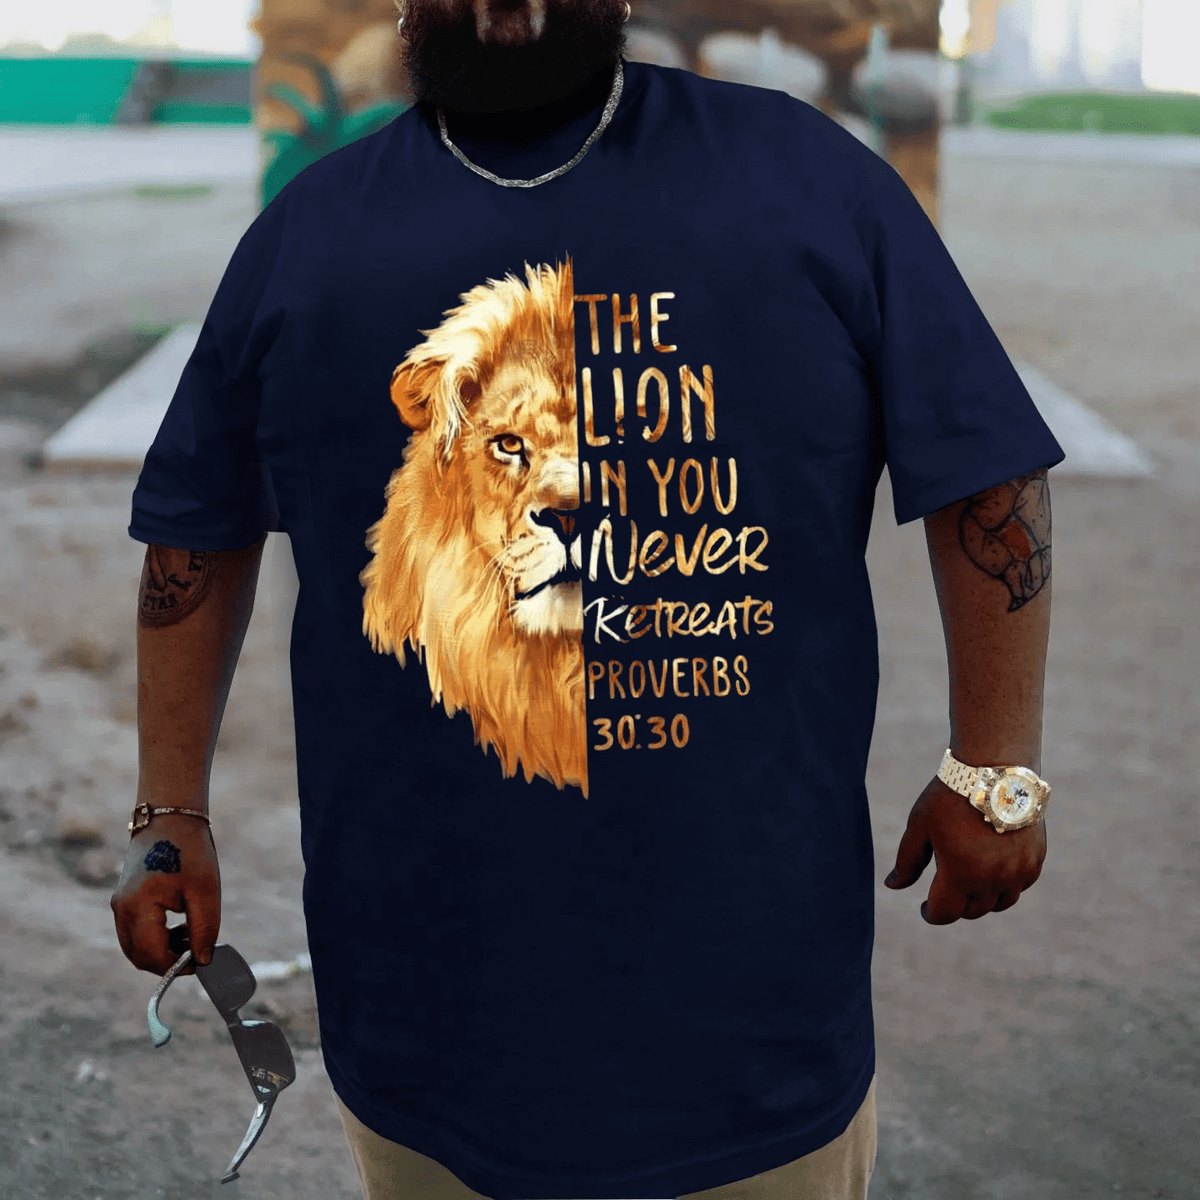 Proverbs 30:30 The Lion in You Never Retreats T-shirt